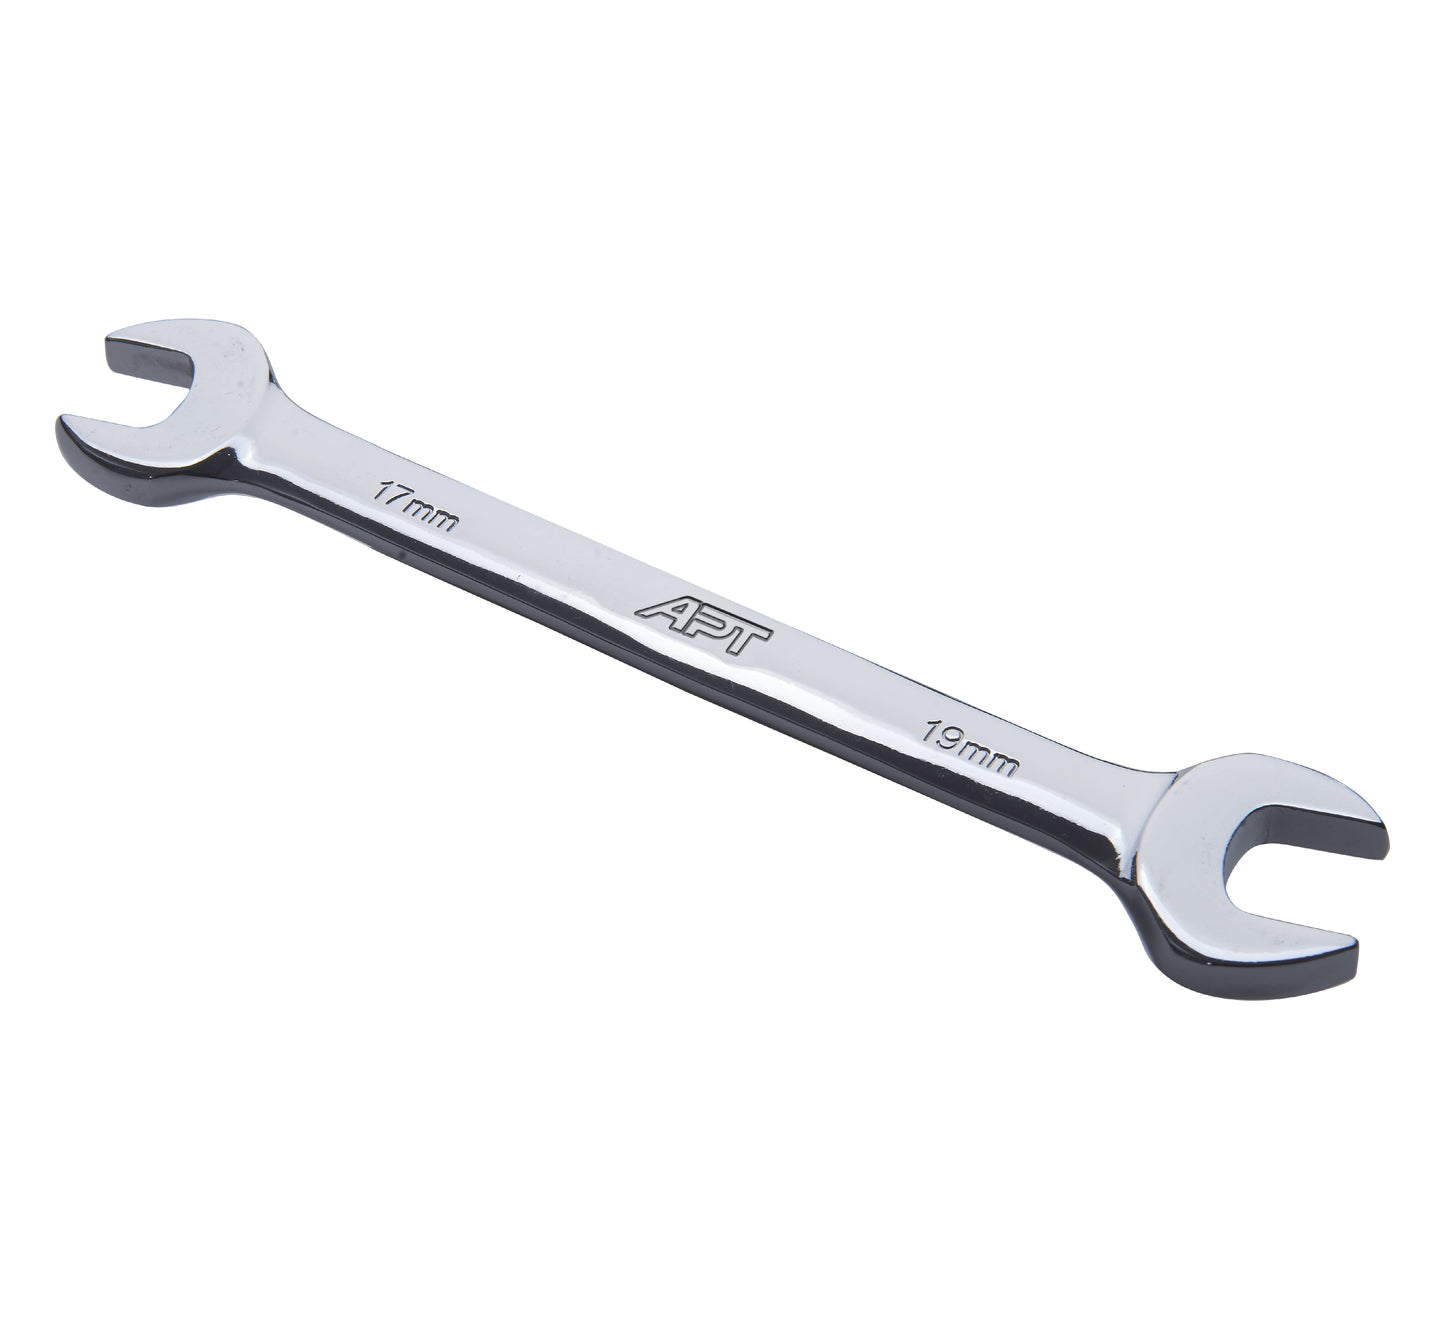 APT DOUBLE OPEN END WRENCH BRIGHT SATIN FINISH PP CARD HOLDER CR-V 16X17MM - AH251401-16X17